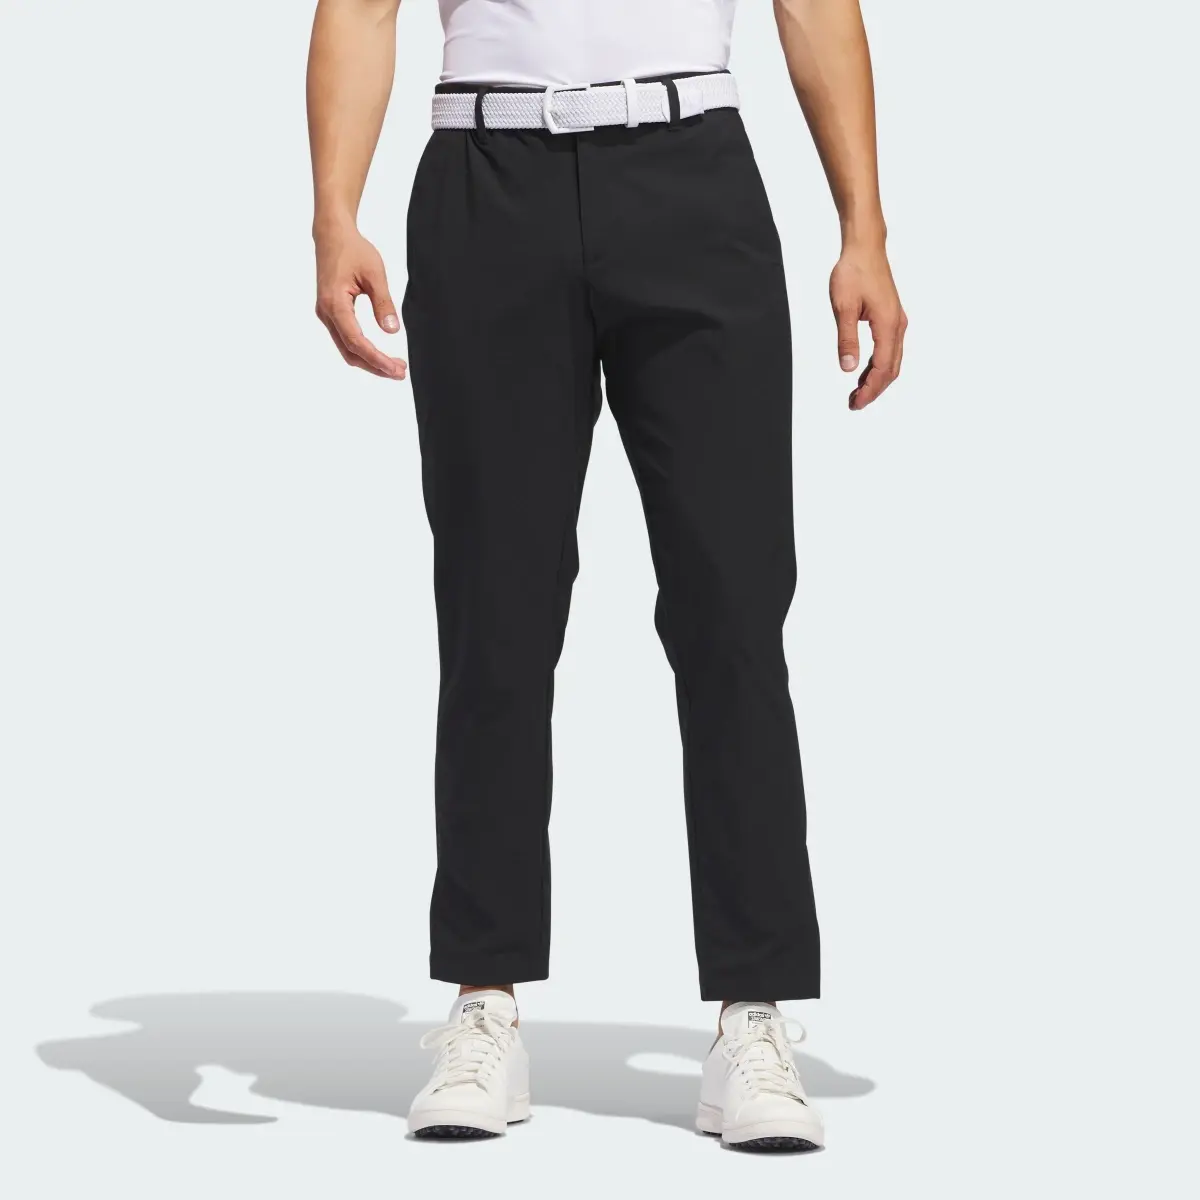 Adidas Ultimate365 Chino Trousers. 1